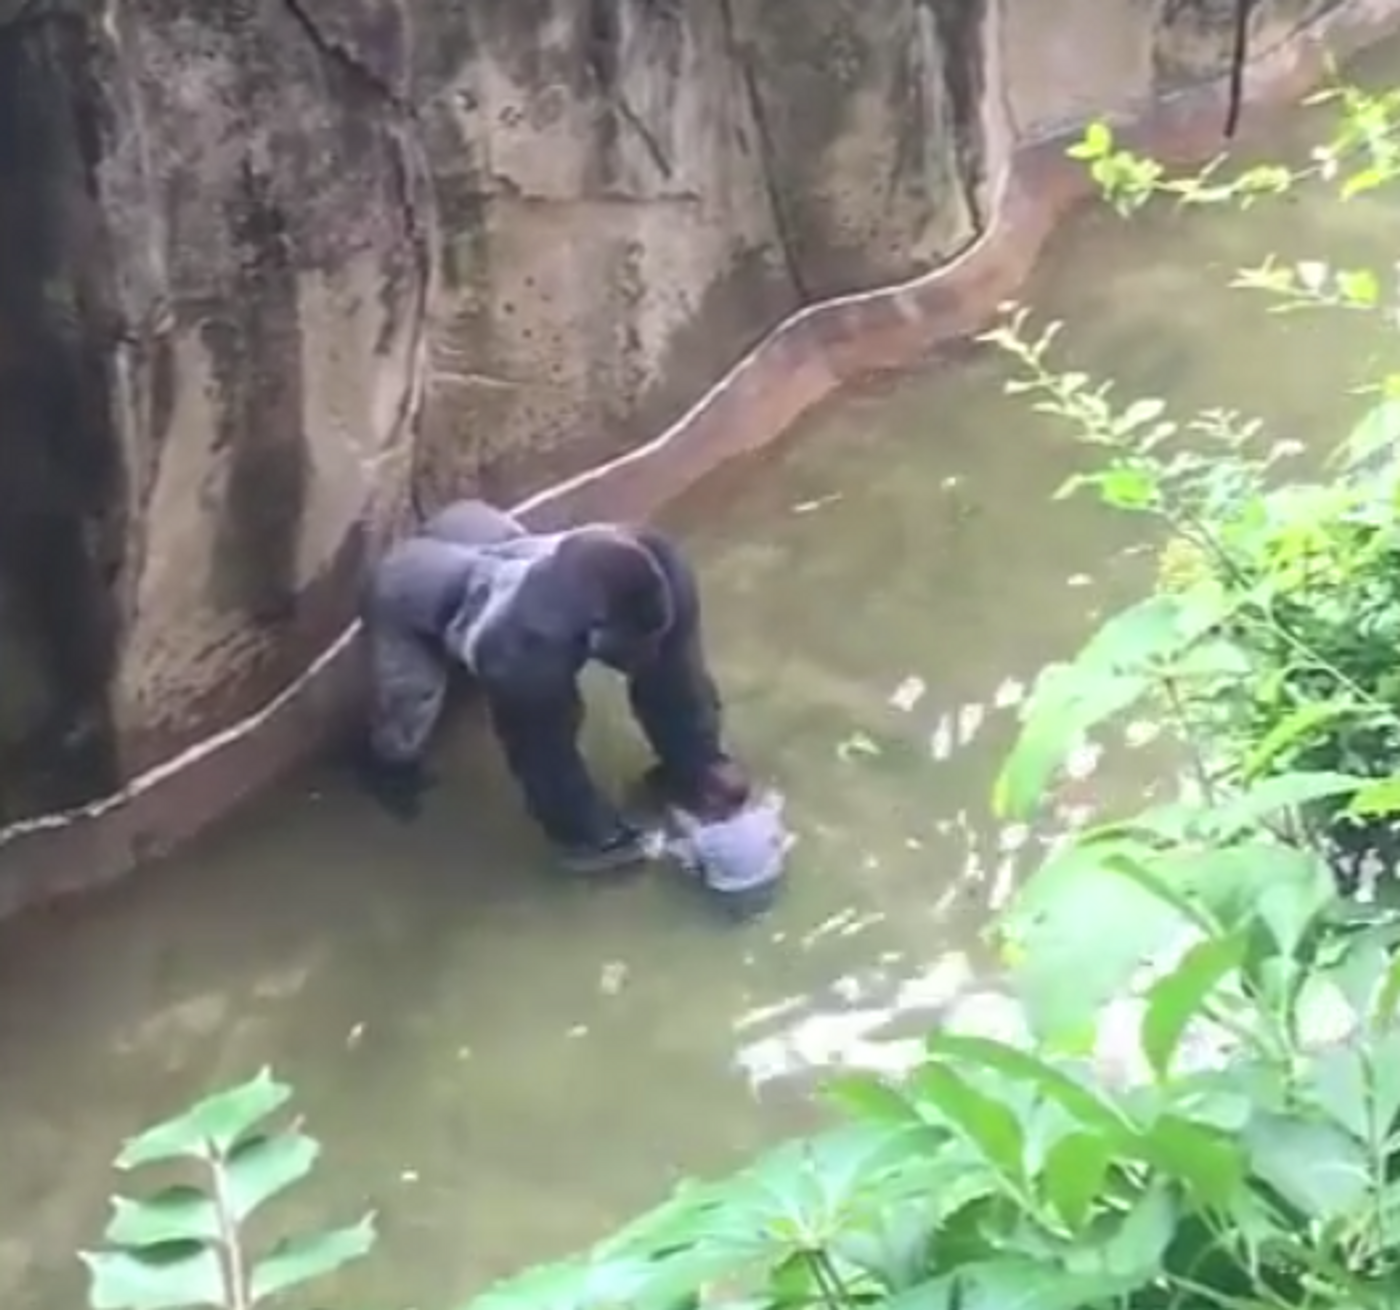 A four-year-old boy somehow ended up inside of Cincinnati Zoo's gorilla enclosure. The gorilla needed to be put down to protect the boy's life.